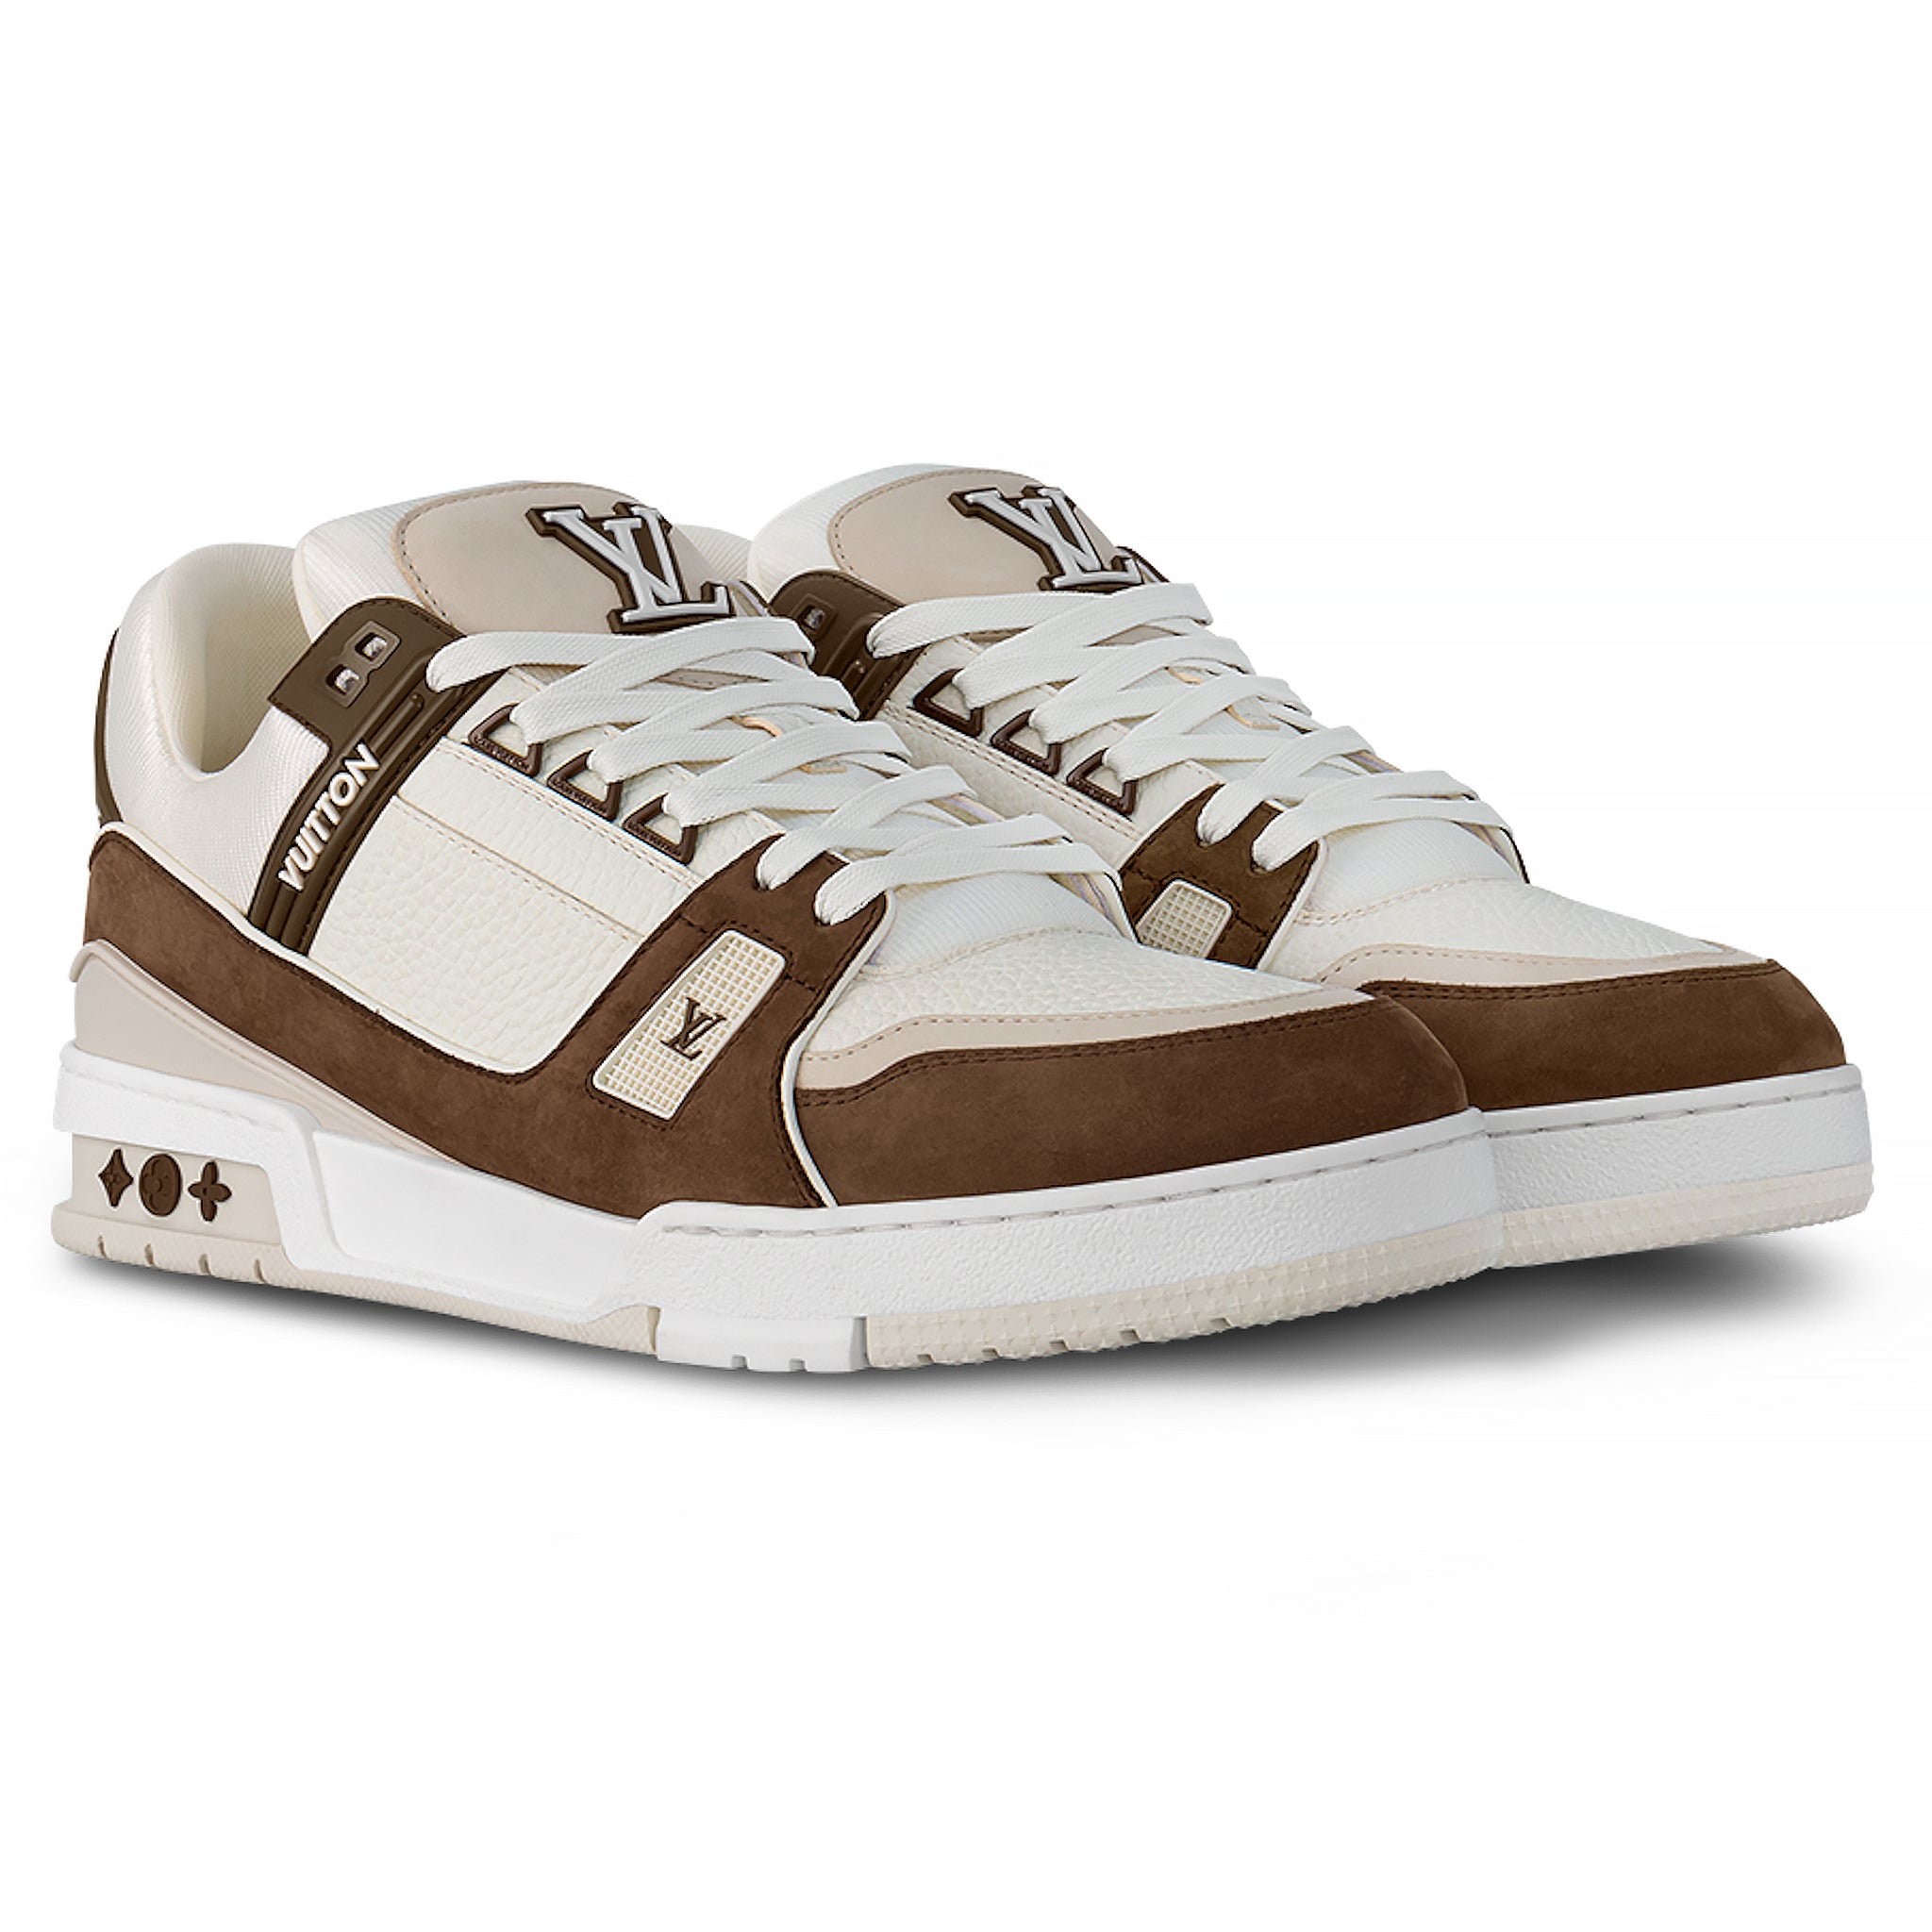 Front side view of Louis Vuitton LV Trainer Calf Leather Moka Sneaker NVPROD4280067V